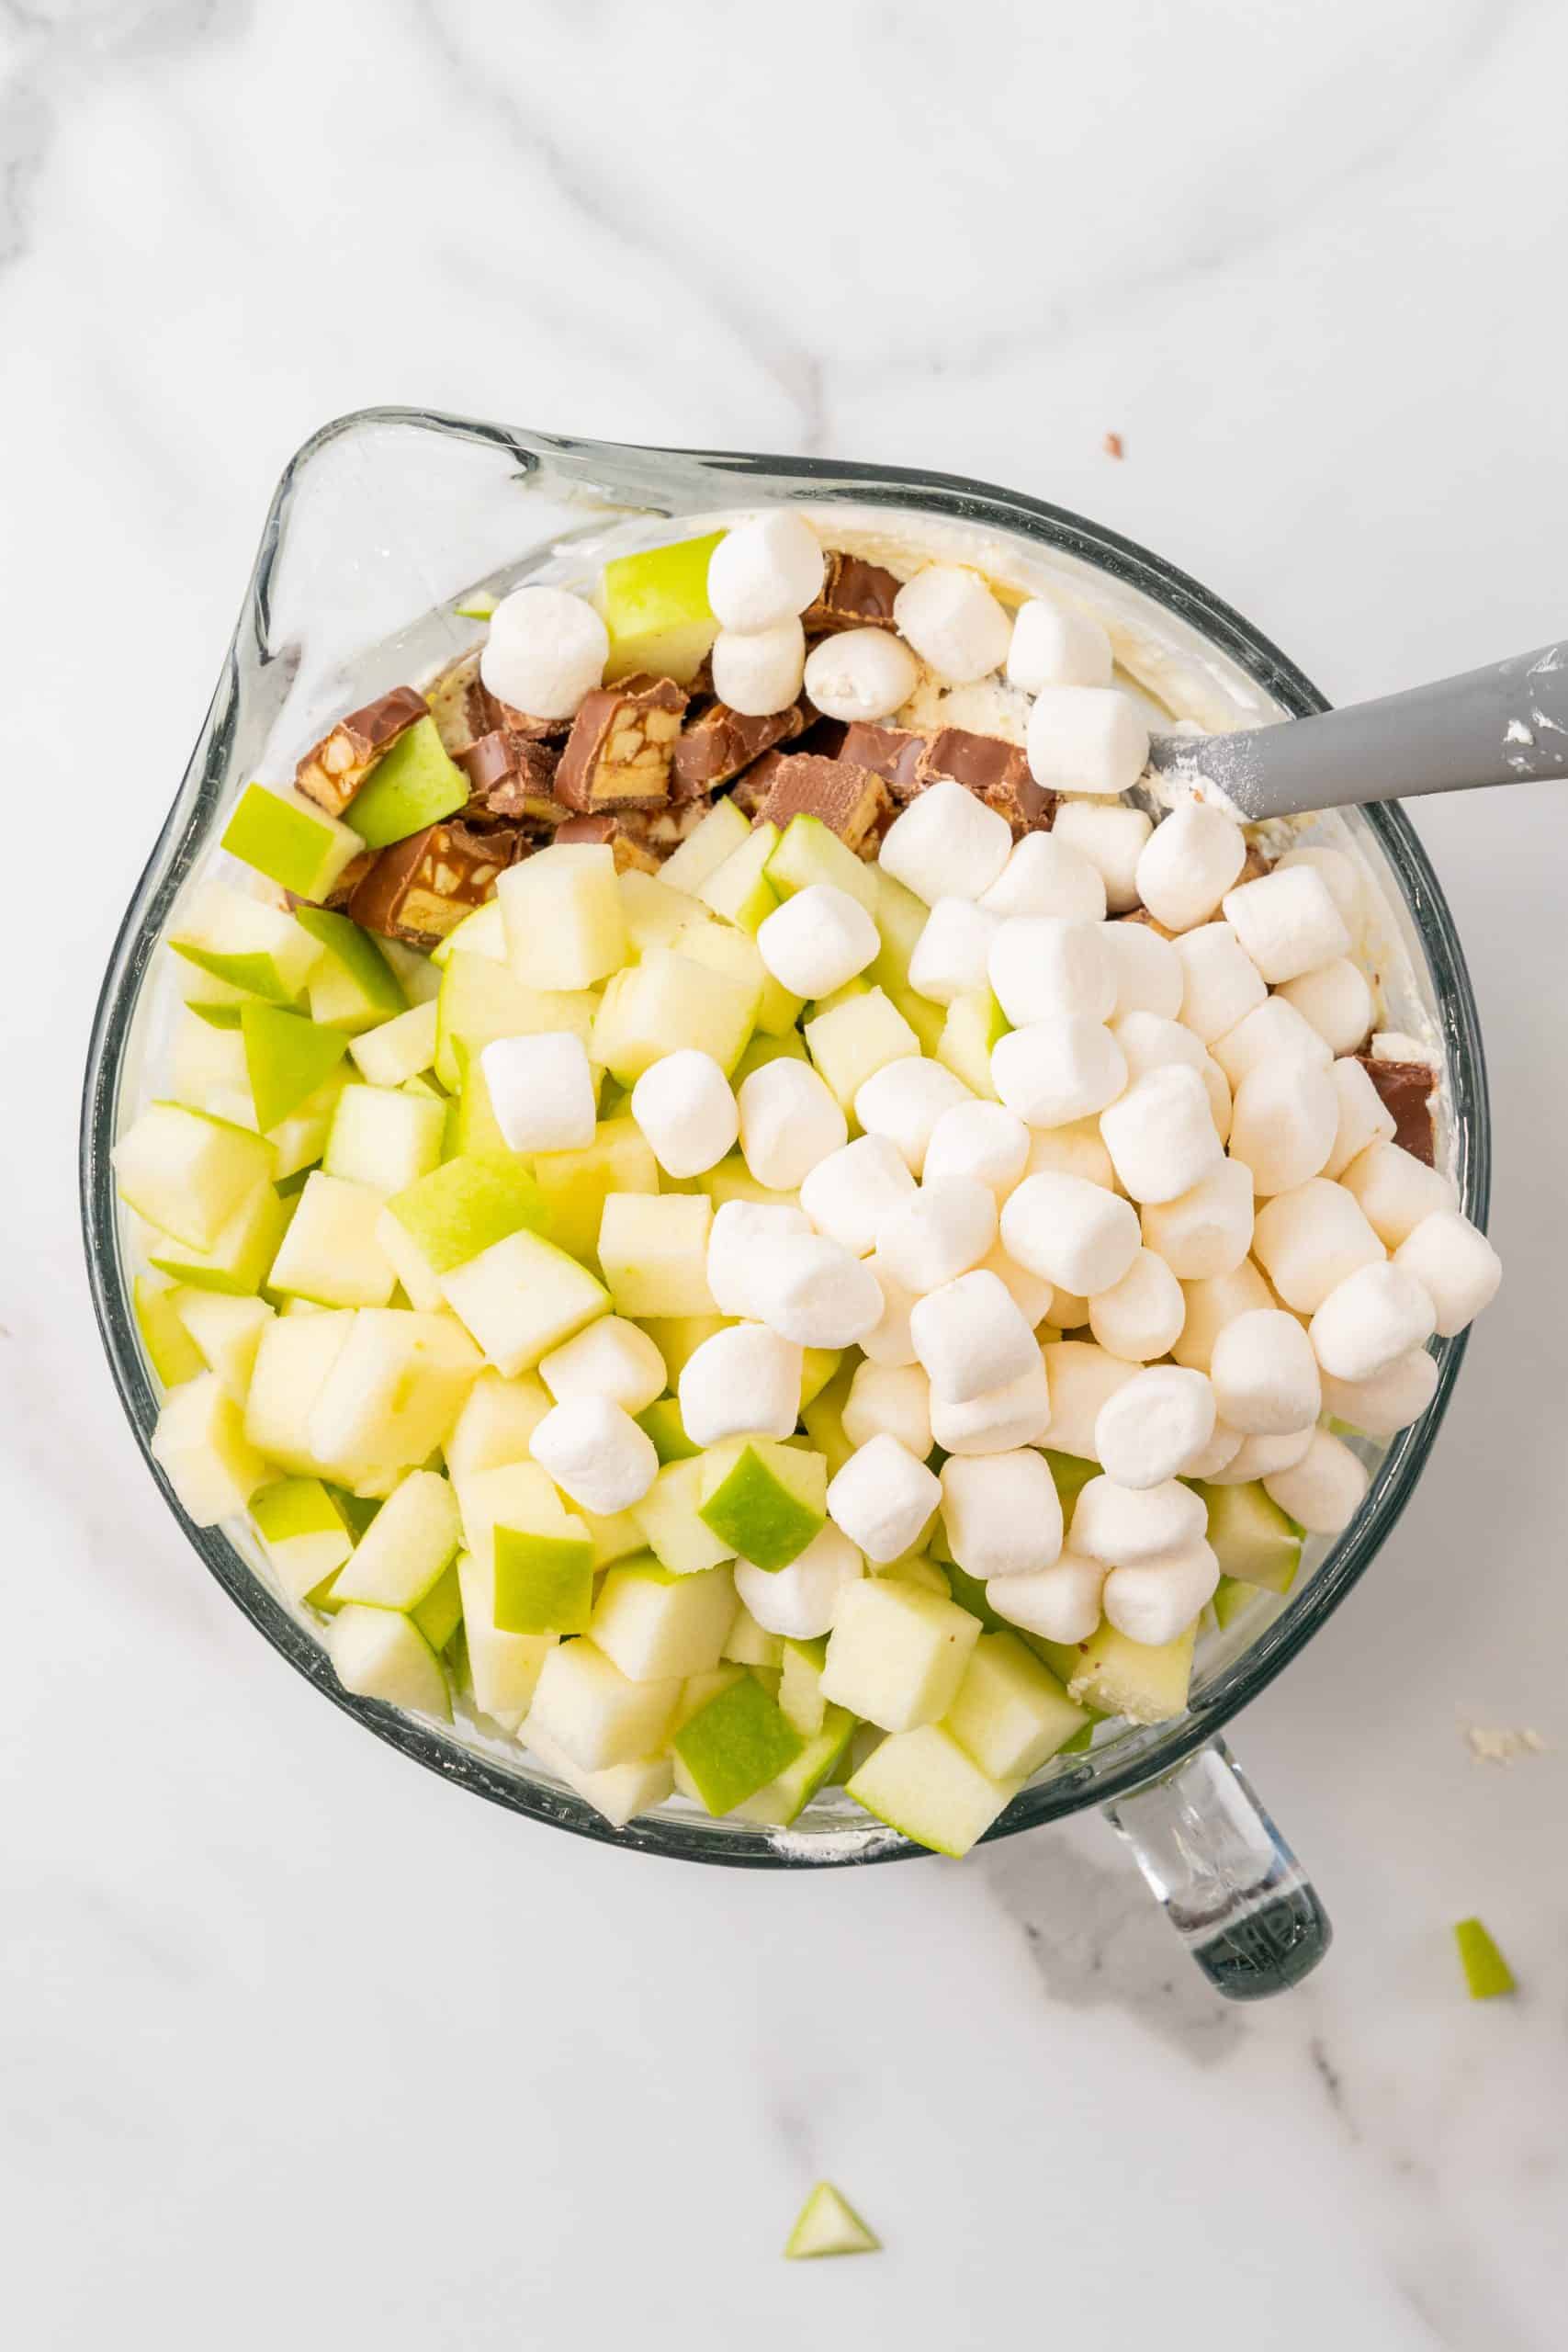 caramel snickers apple salad ingredients in a large glass mixing bowl